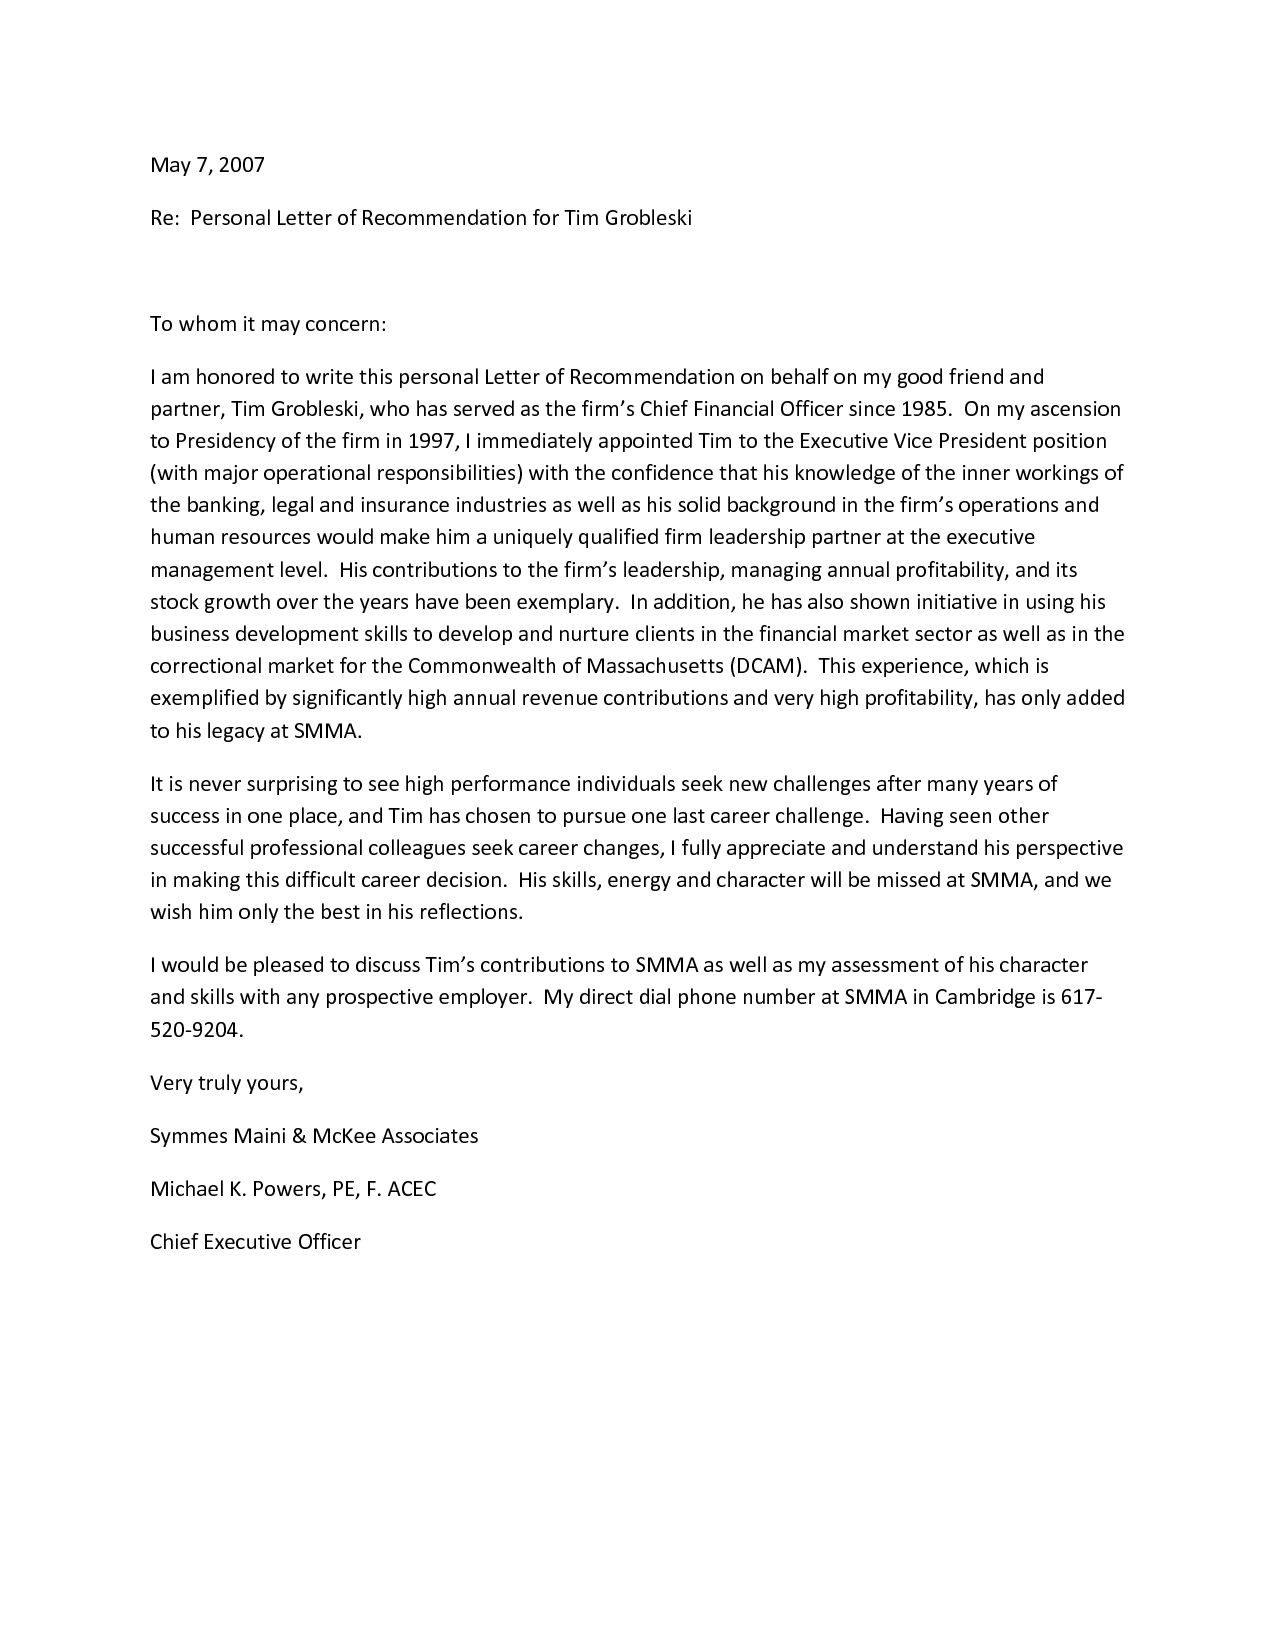 Recommendation Letter For A Friend Template with sizing 1275 X 1650